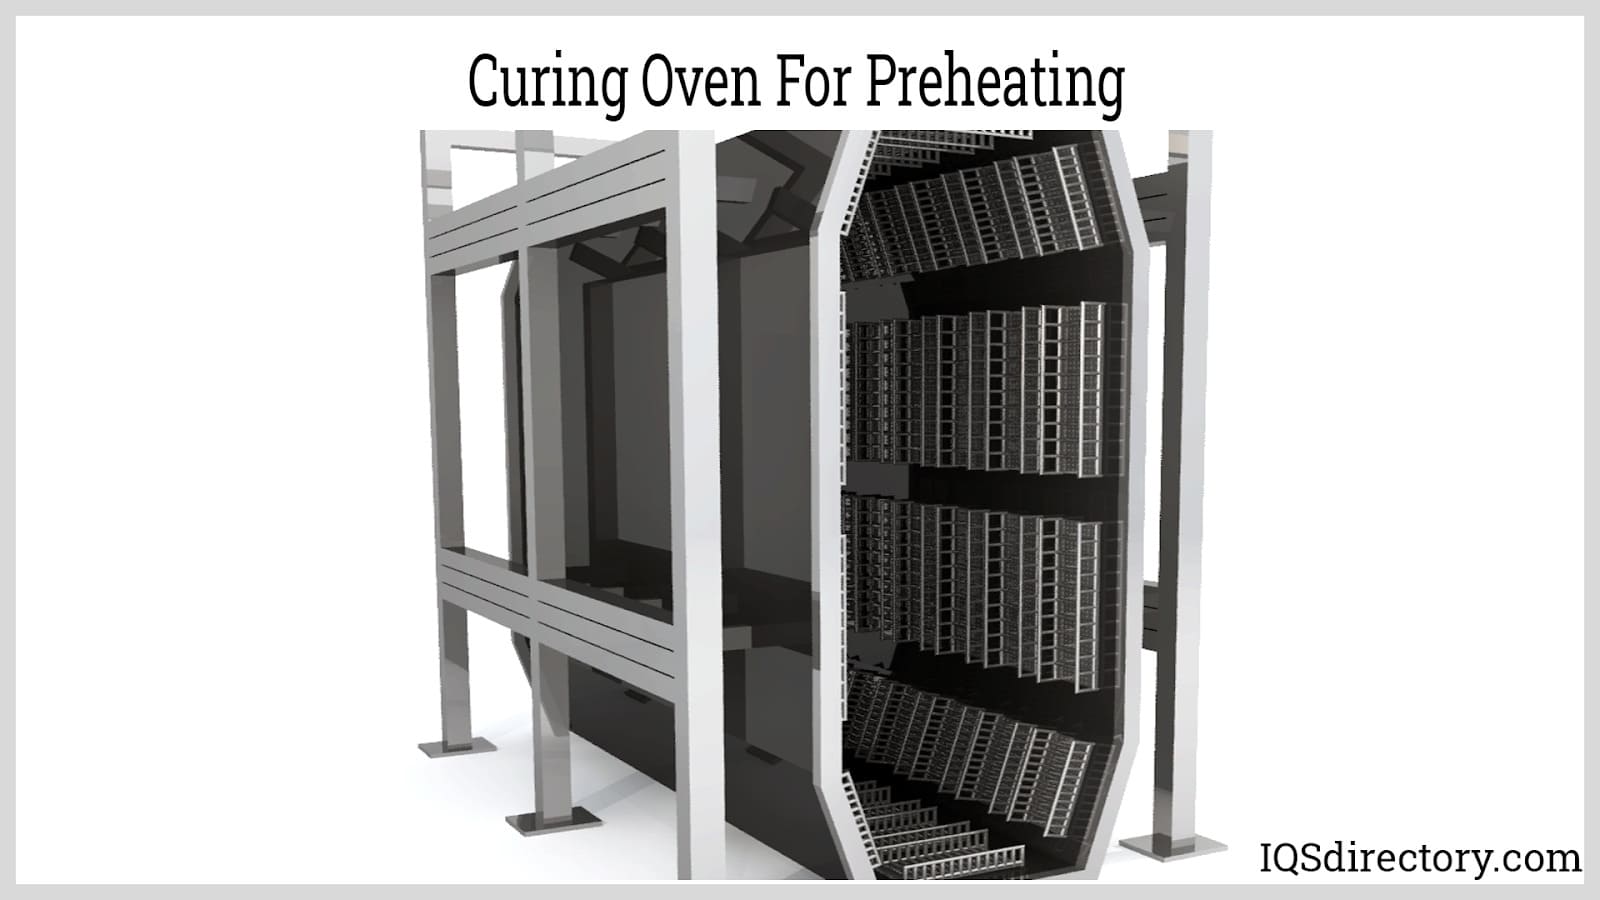 Curing Ovens: Types, Applications, Benefits, and Maintenance